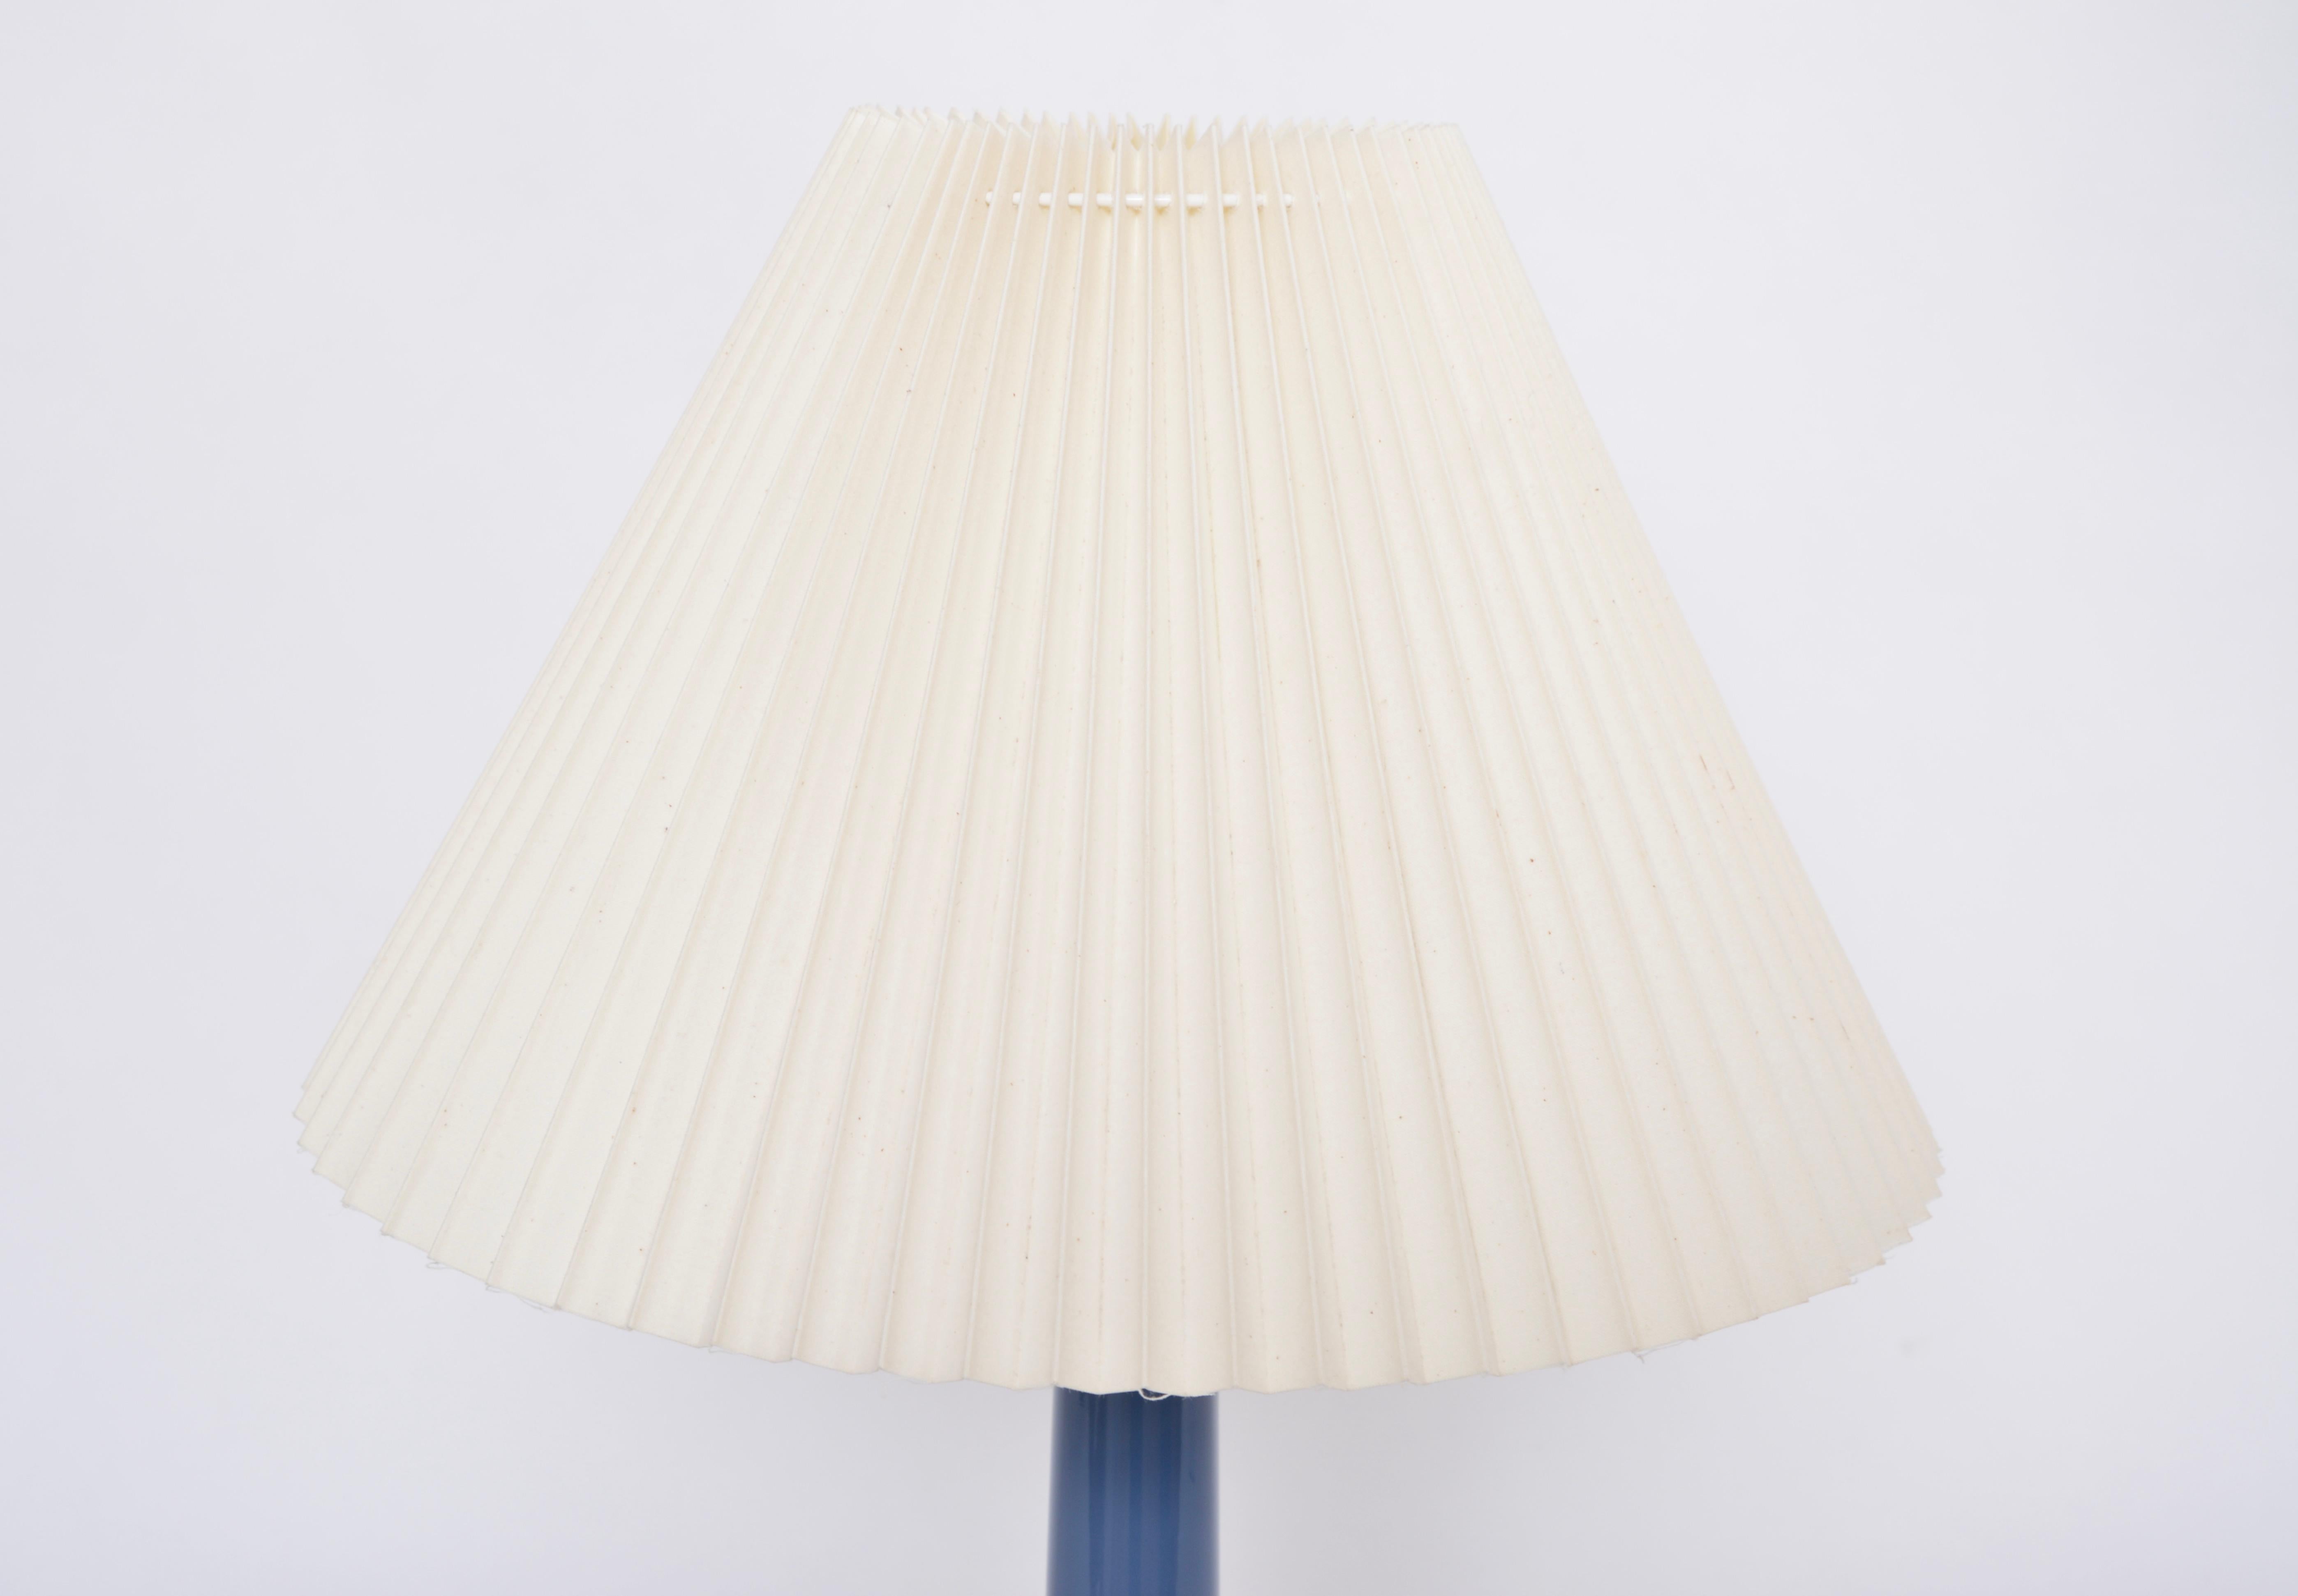 20th Century Rare Blue Danish Midcentury Table Lamp by Esben Klint for Holmegaard For Sale